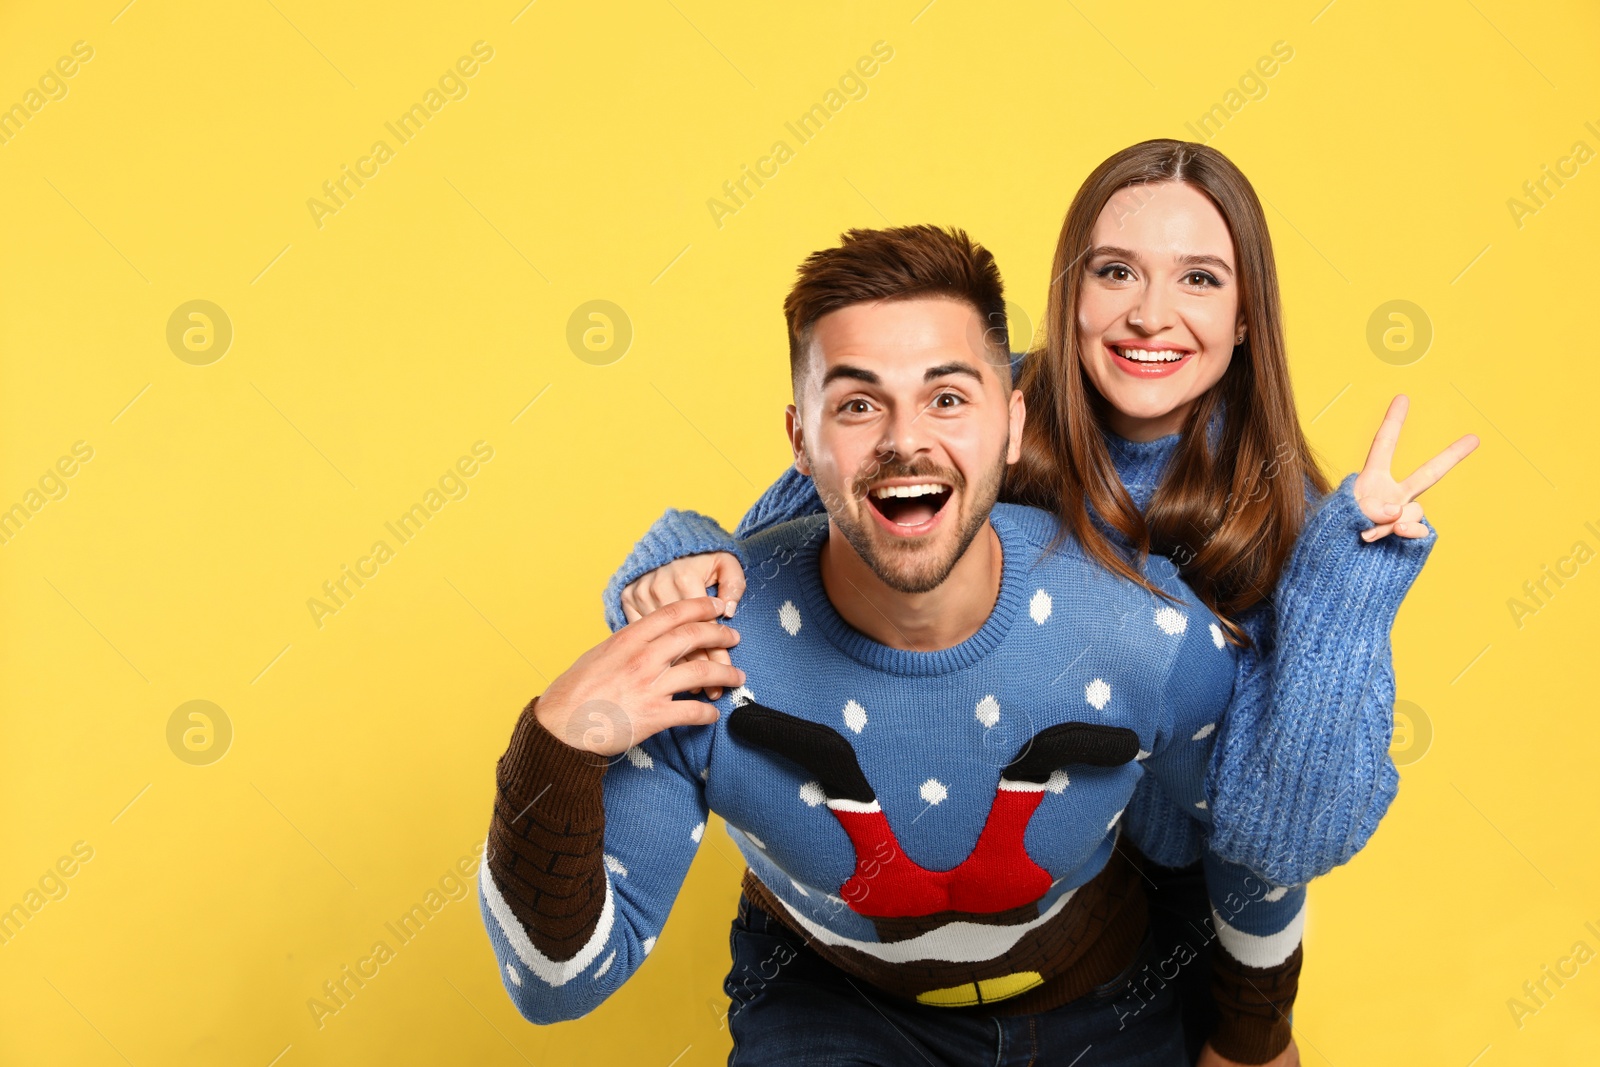 Photo of Couple wearing Christmas sweaters on yellow background